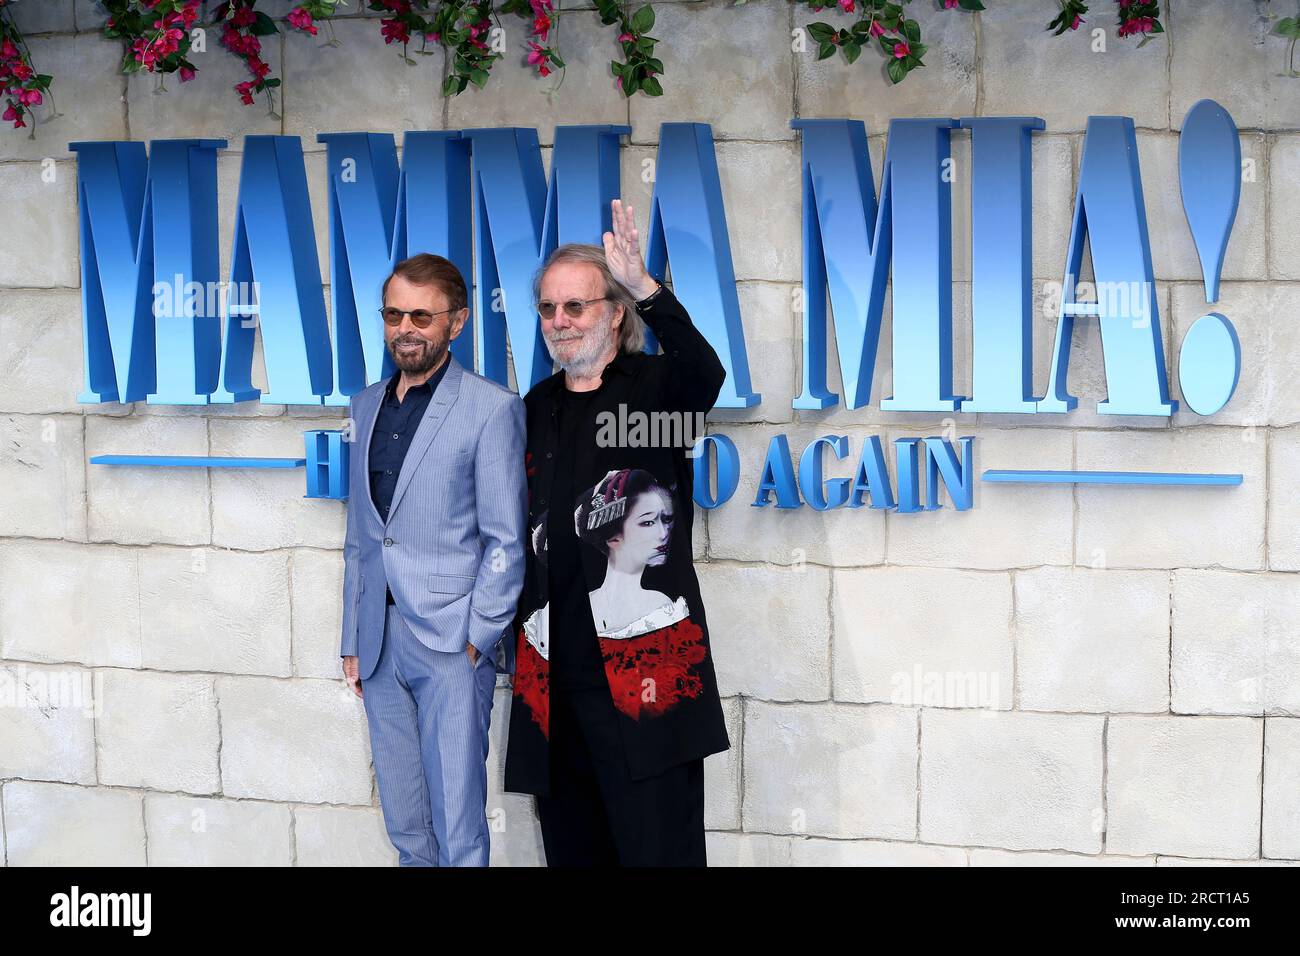 https://c8.alamy.com/comp/2RCT1A5/london-uk-16th-july-2018-benny-andersson-and-bjorn-ulvaeus-attend-the-uk-premiere-of-mamma-mia!-here-we-go-again-at-the-eventim-apollo-in-london-photo-by-fred-duvalsopa-imagessipa-usa-credit-sipa-usaalamy-live-news-2RCT1A5.jpg